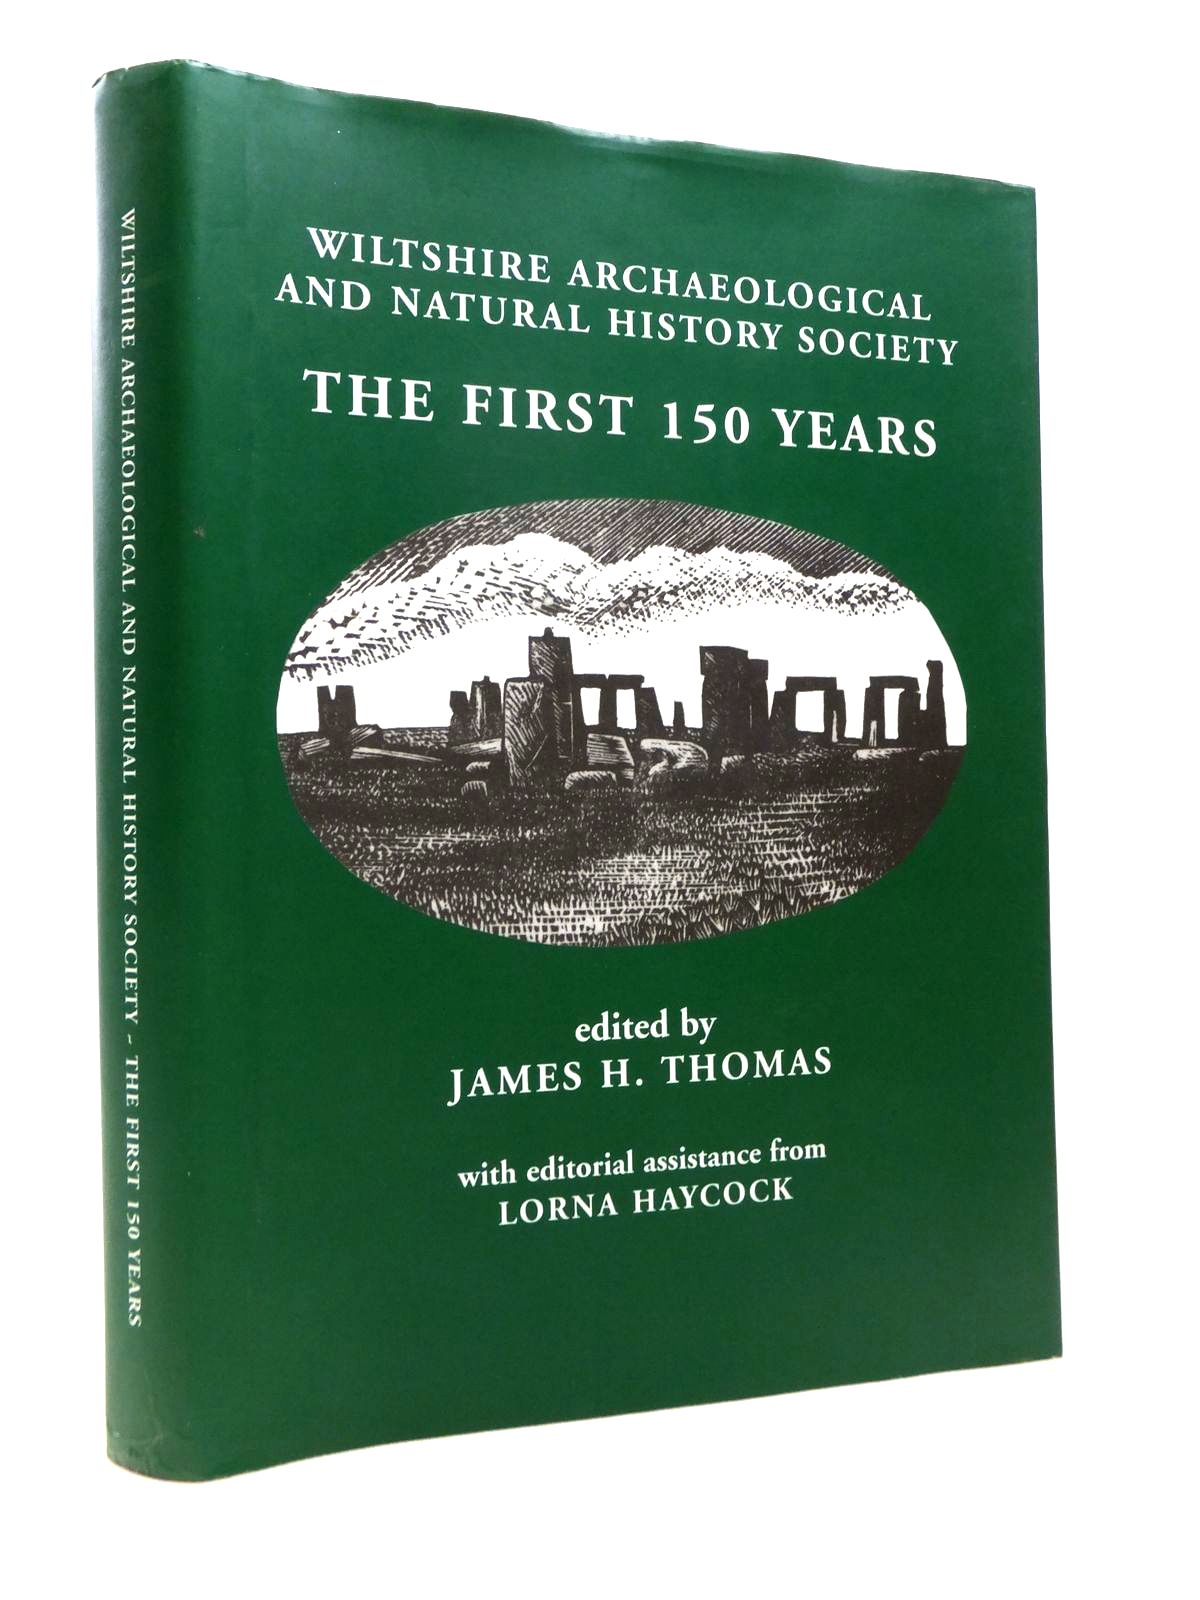 Photo of WILTSHIRE ARCHAEOLOGICAL AND NATURAL HISTORY SOCIETY: THE FIRST 150 YEARS- Stock Number: 1812292